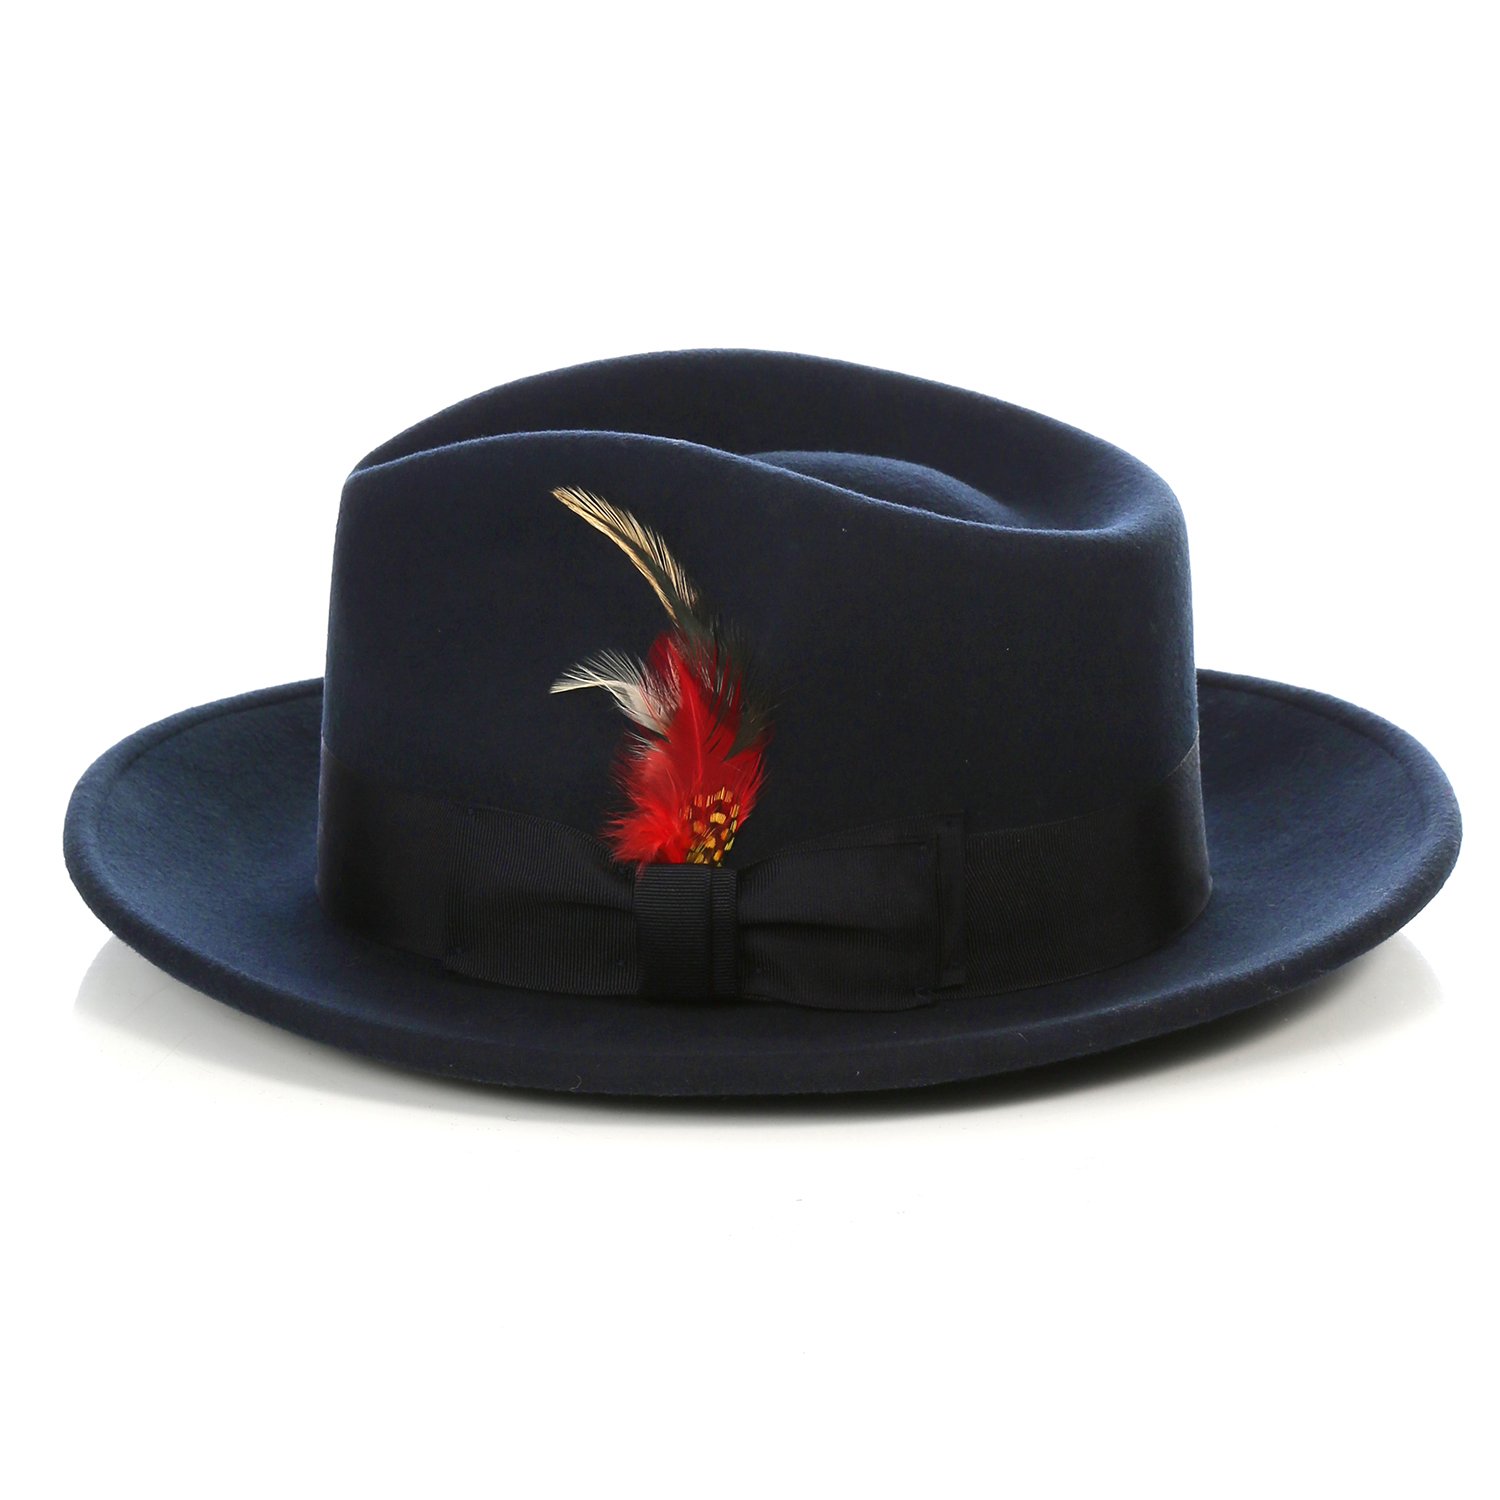 Ferrecci Navy Wool Crushable Fedora with Removable Feather - Unisex, Men’s, Women’s Traveler Hat (X-Large 61cm-7 5/8) - image 2 of 4